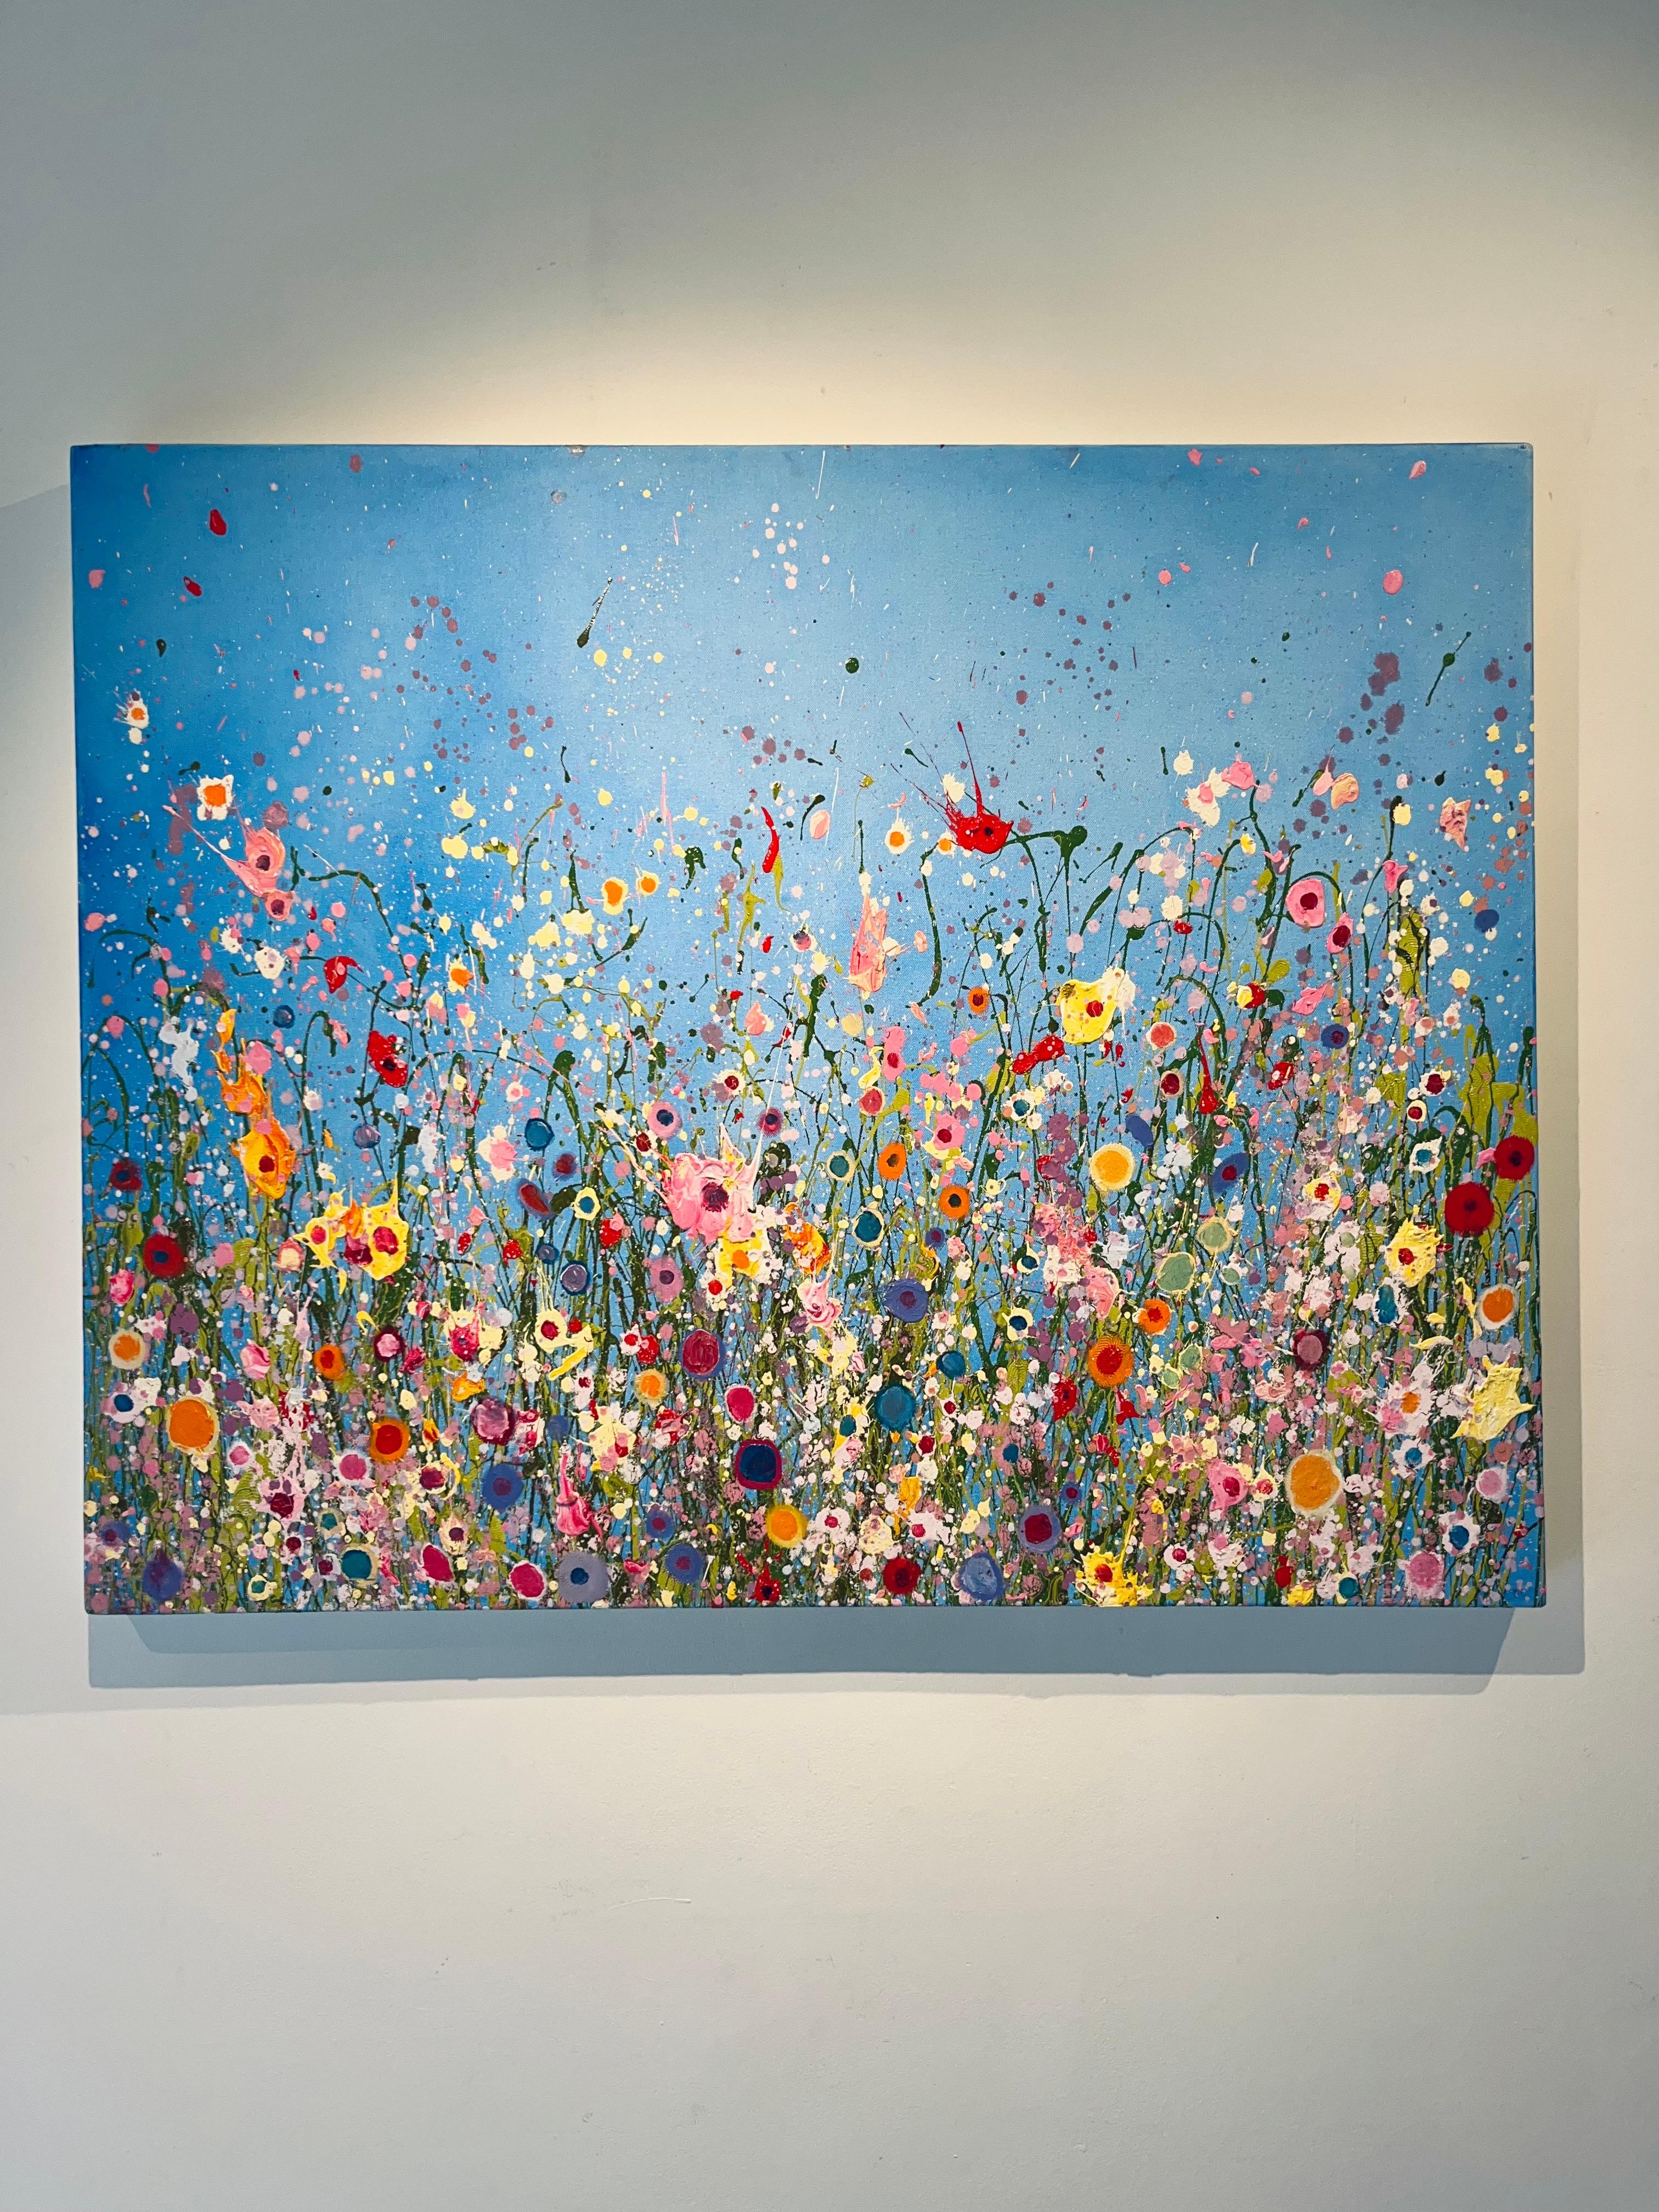 Summer Skies and Butterflies- original abstract floral oil painting- modern art - Painting by Yvonne Coomber